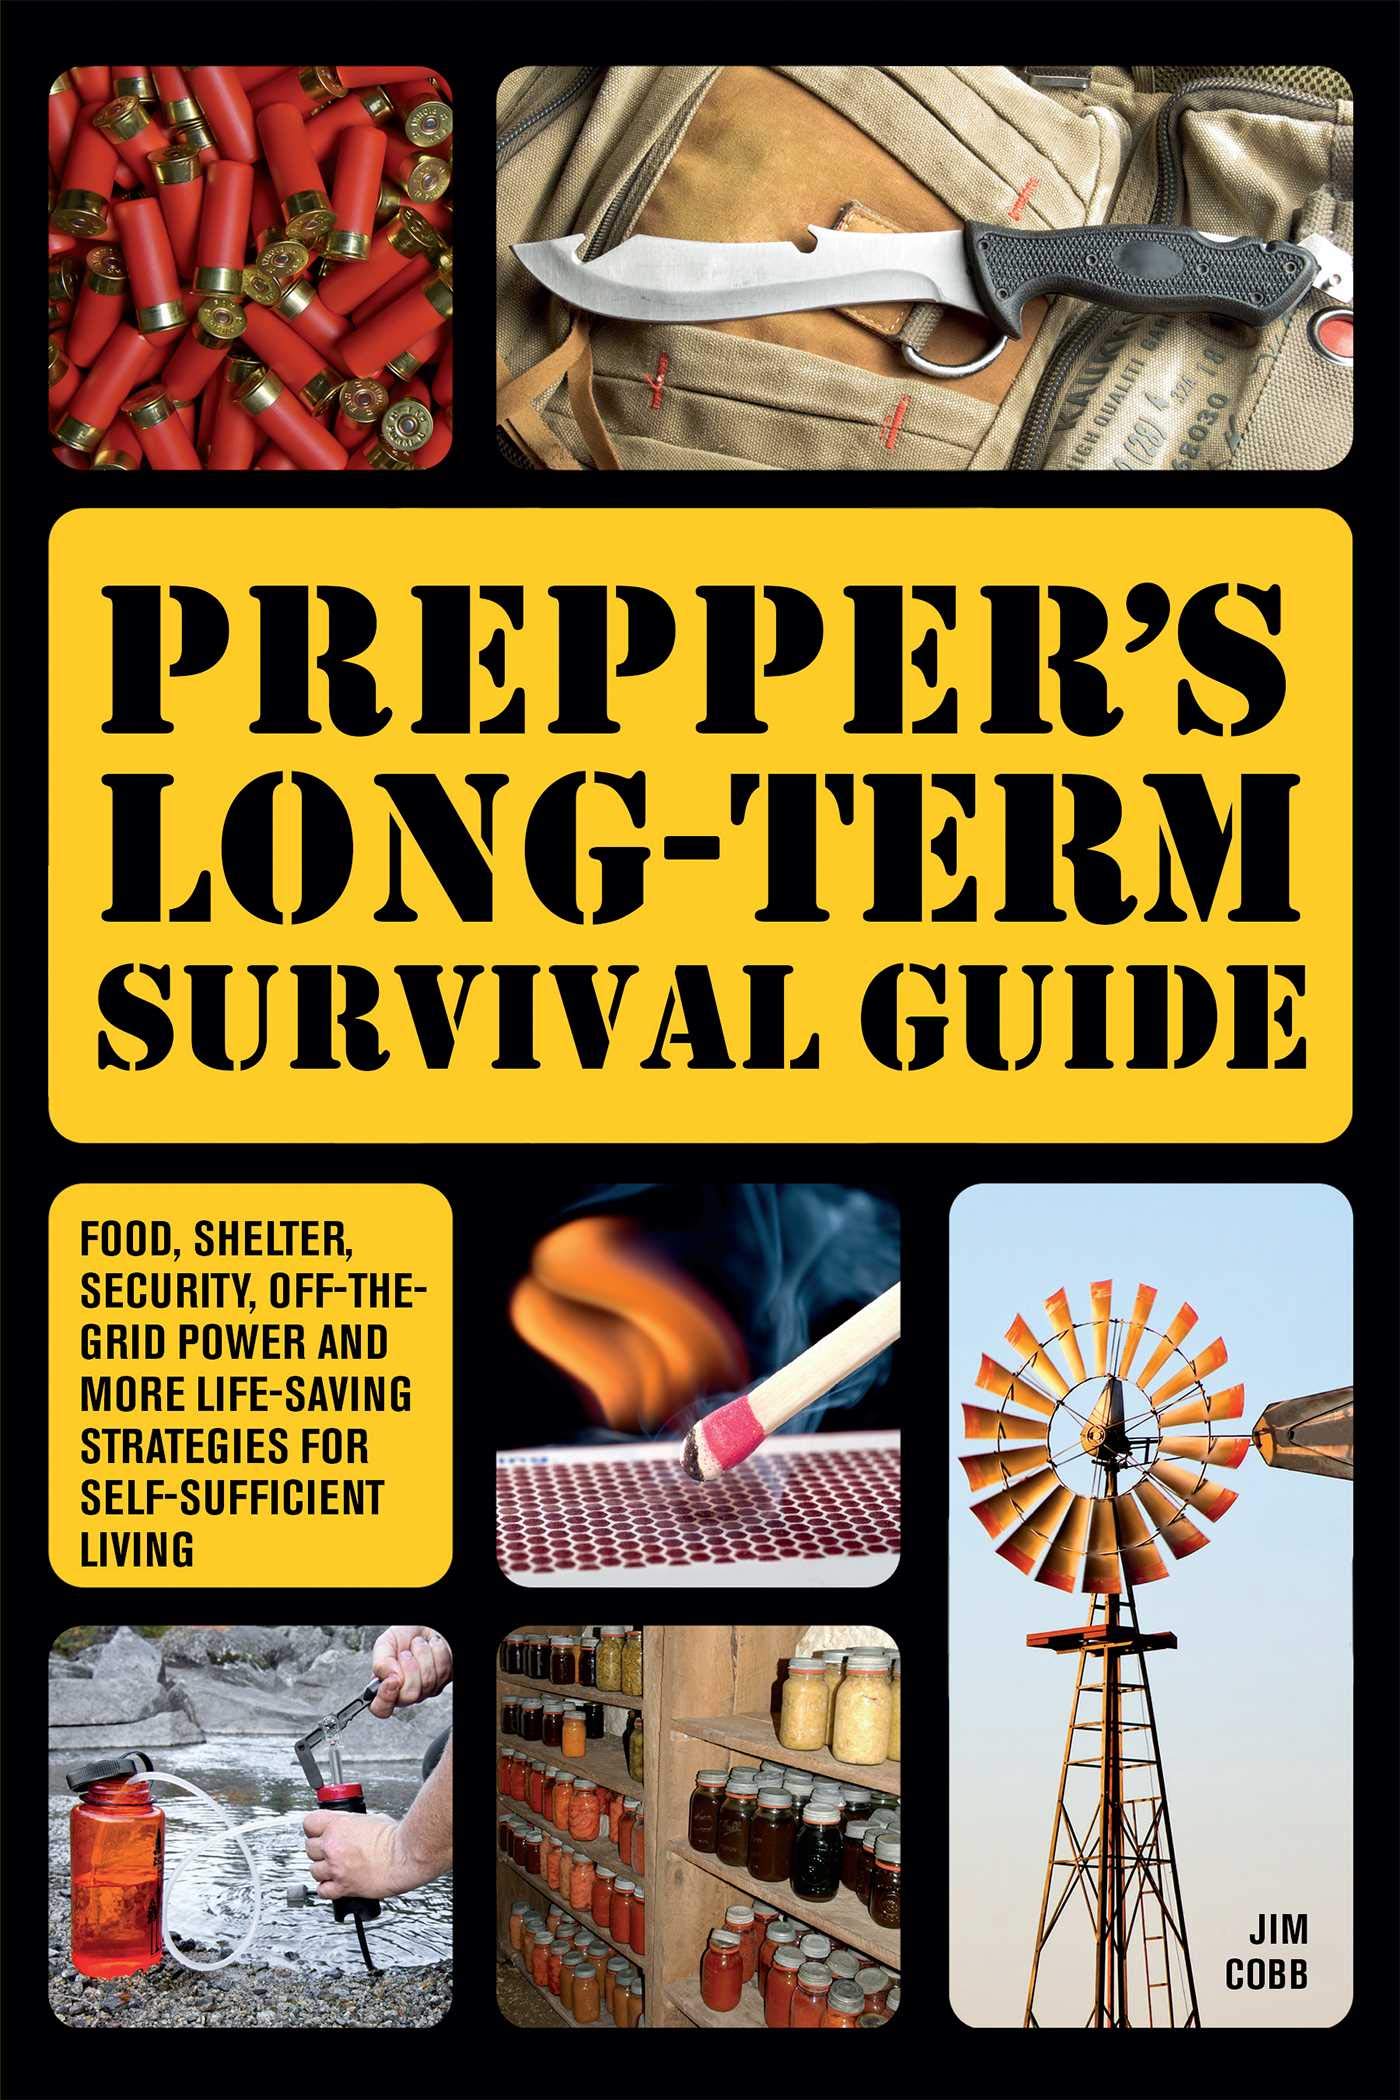 Prepper Definition: What Does It Mean To Be a Preparer?
